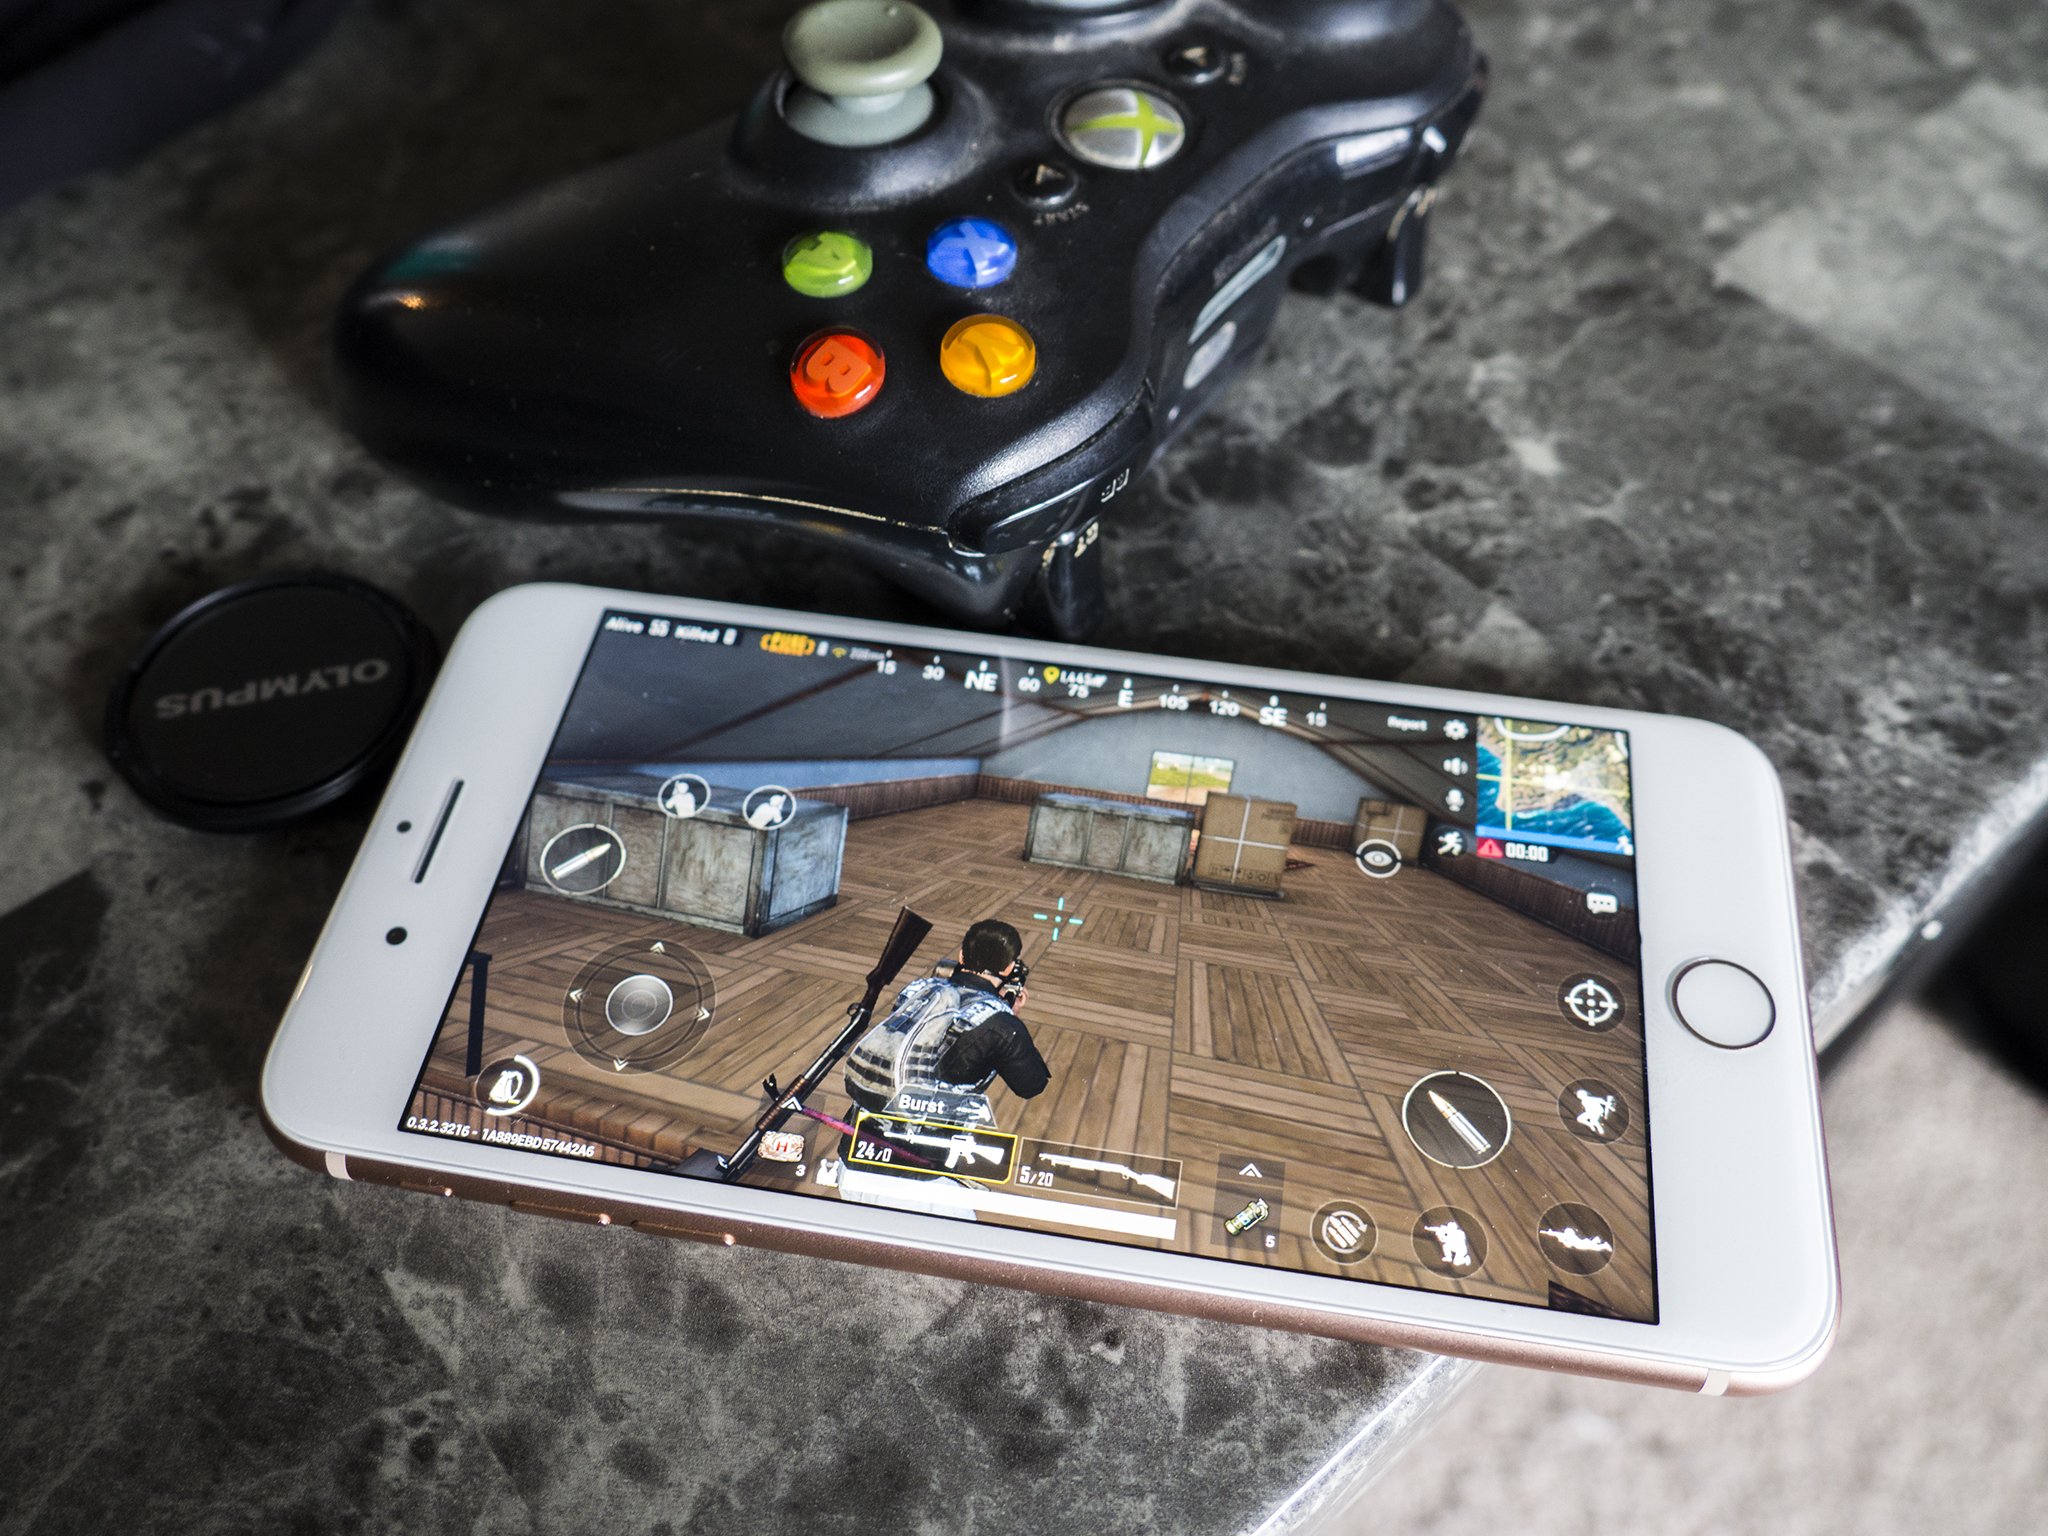 Pubg Mobile Tips And Tricks To Help You Stay Alive Imore - 